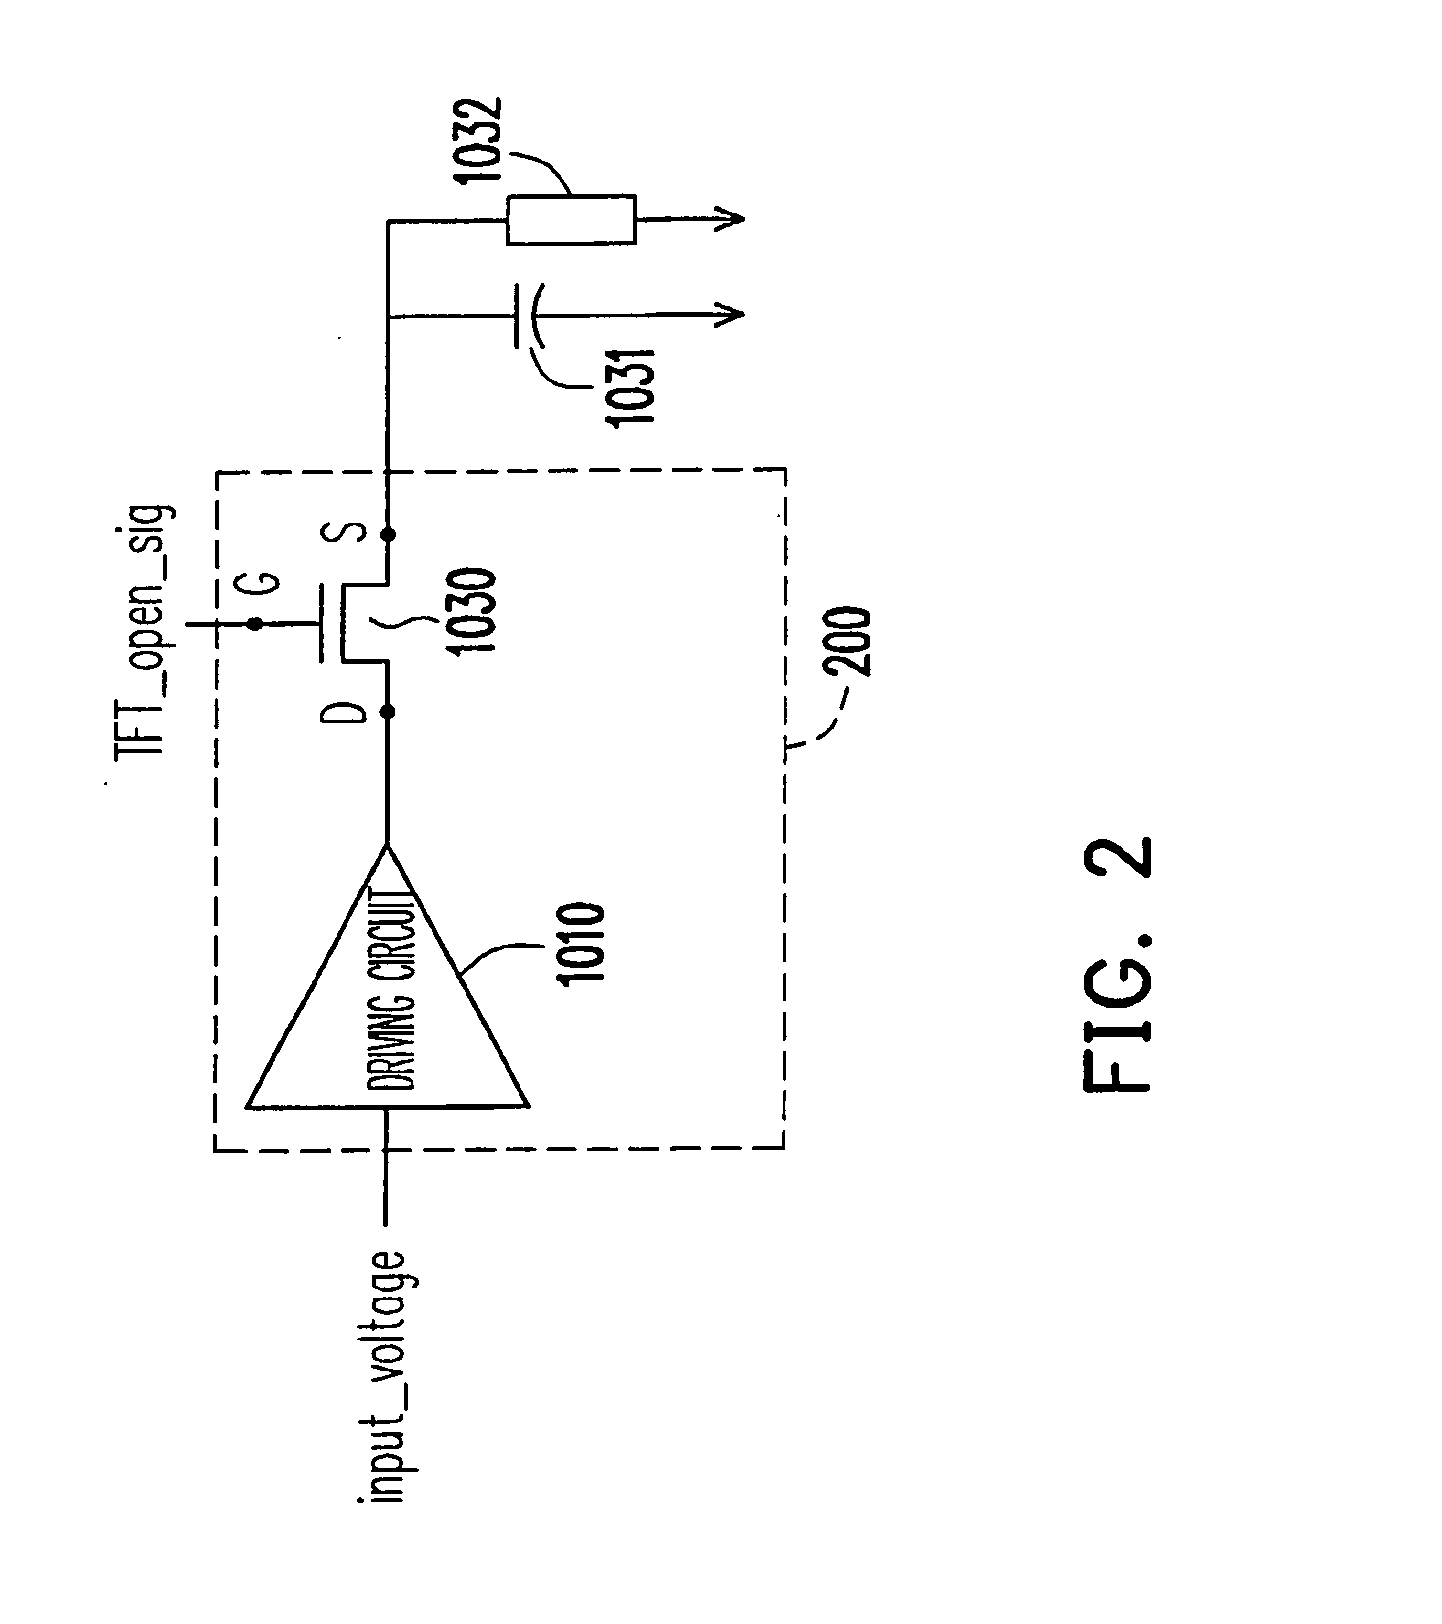 Driving apparatus, system and method thereof